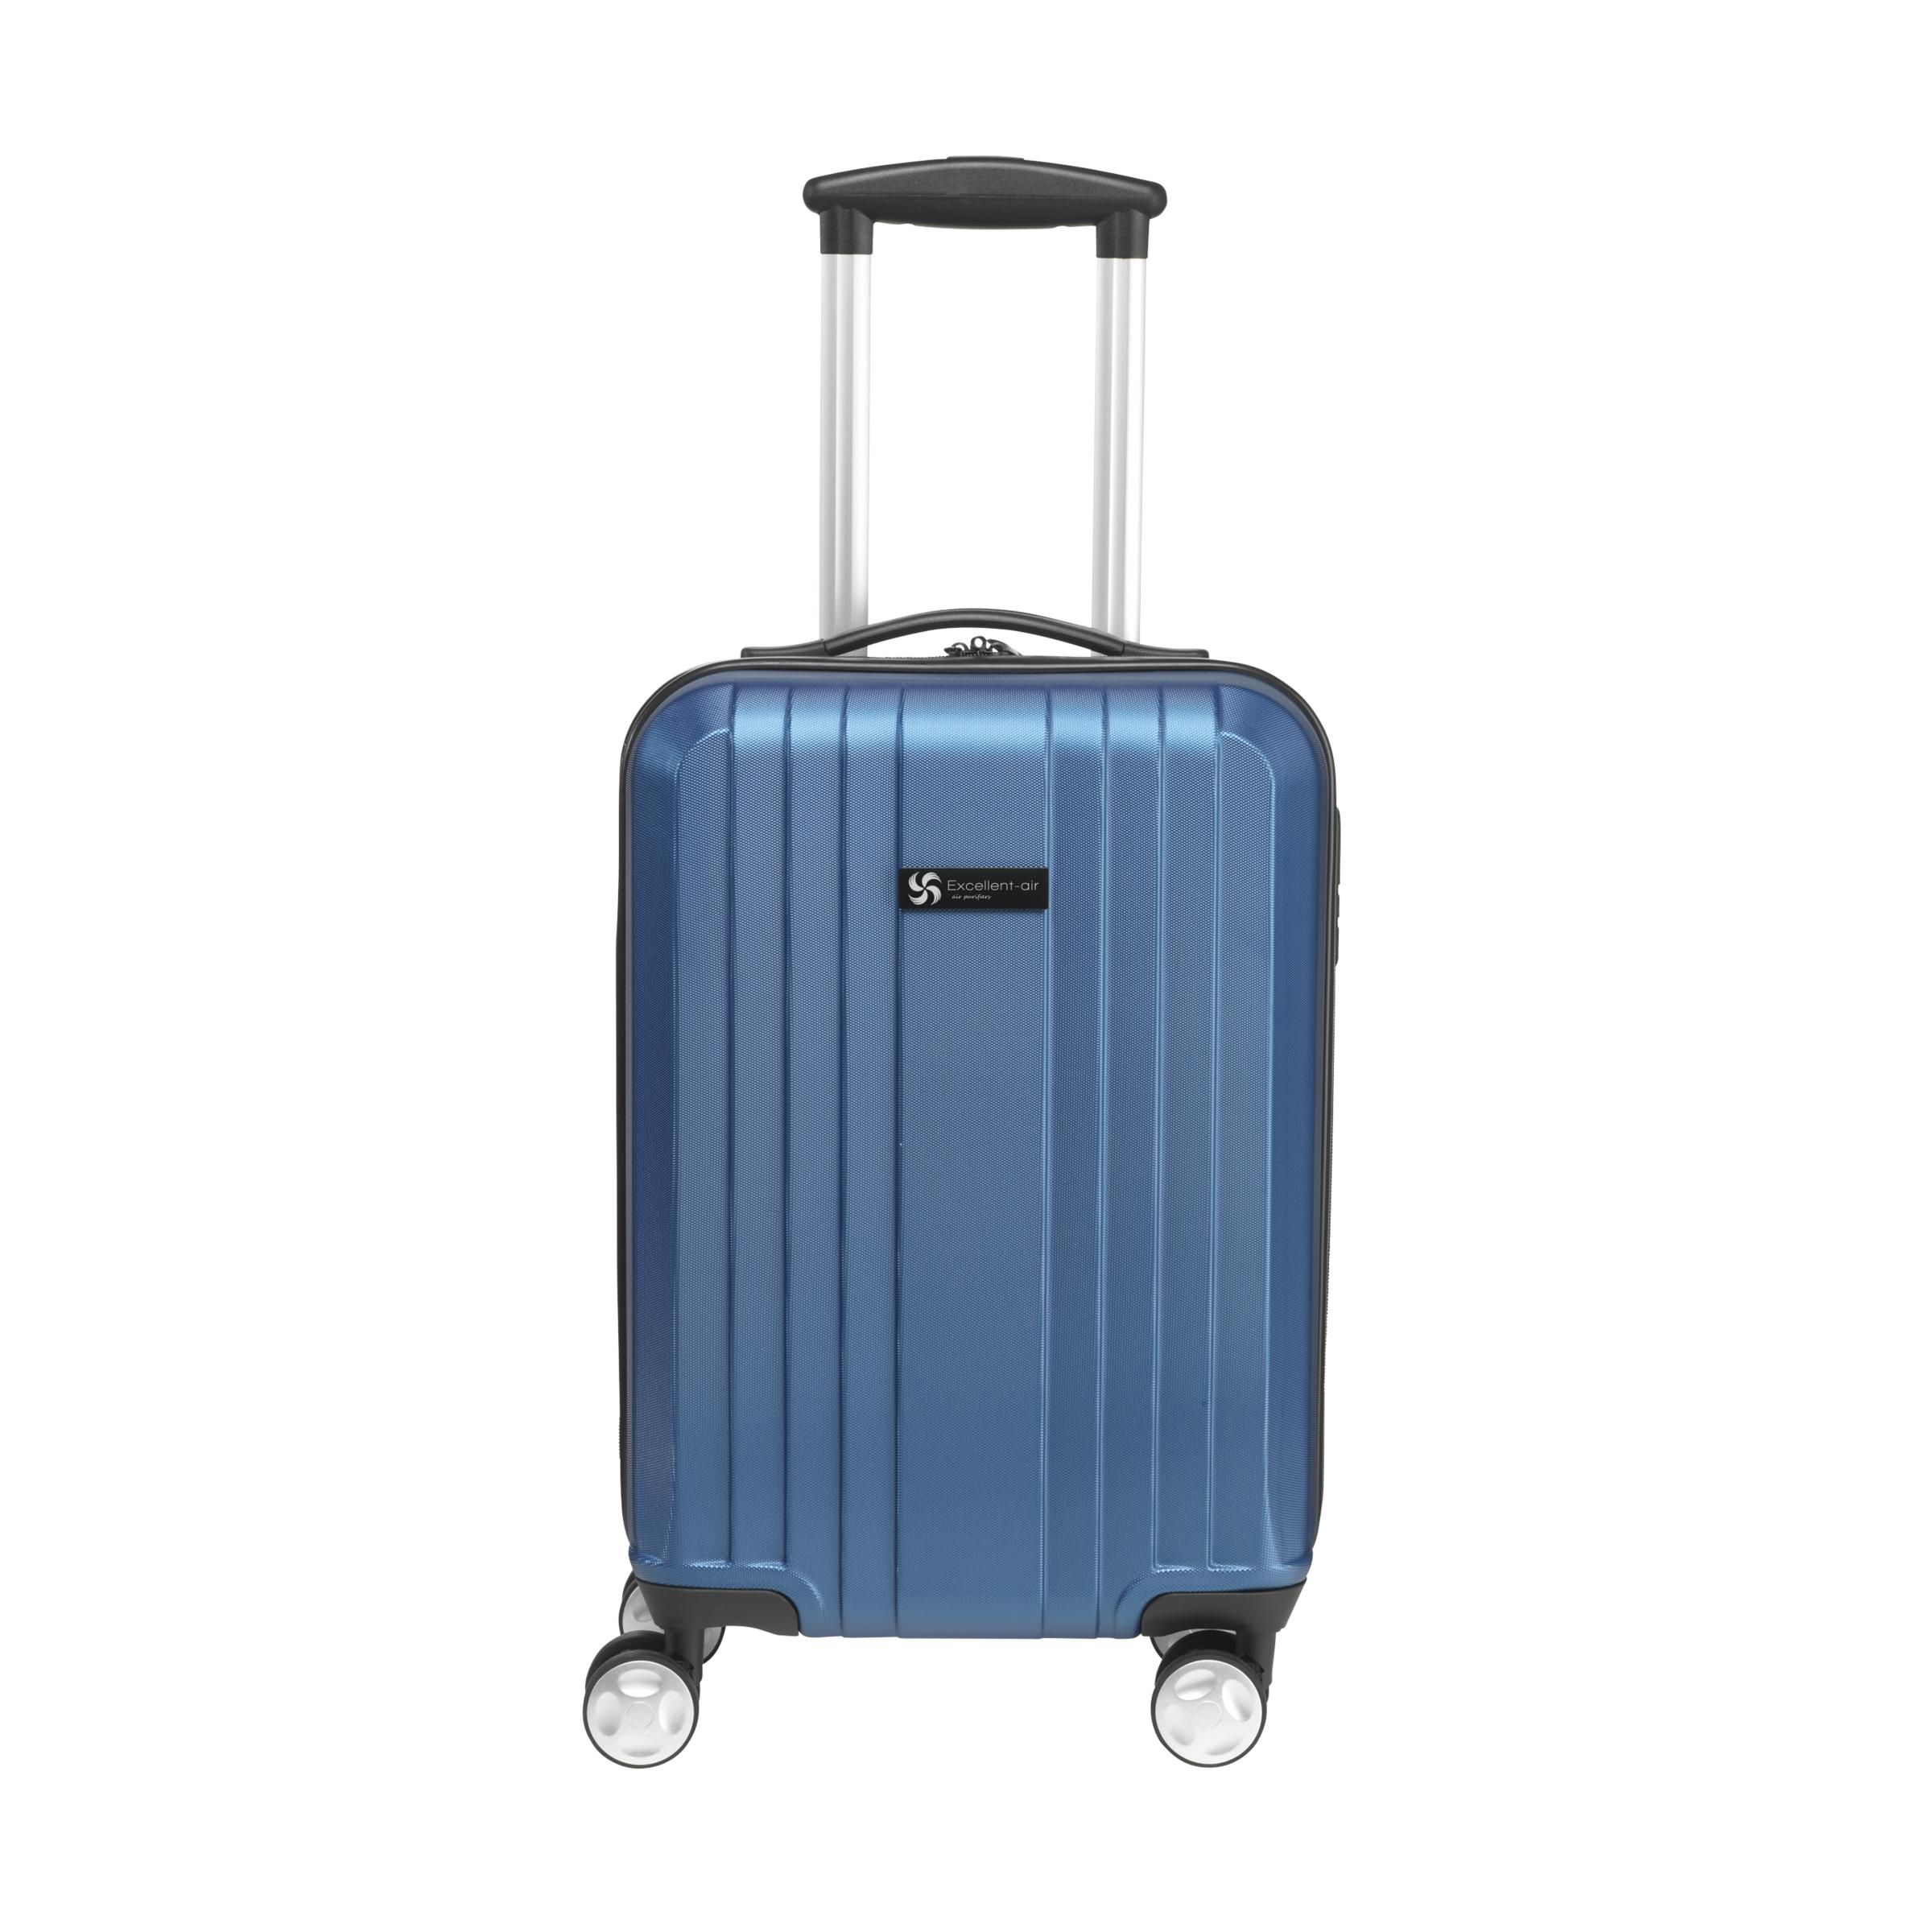 Lightweight 18" ABS Trolley Case with Metallic Look - Ancoats